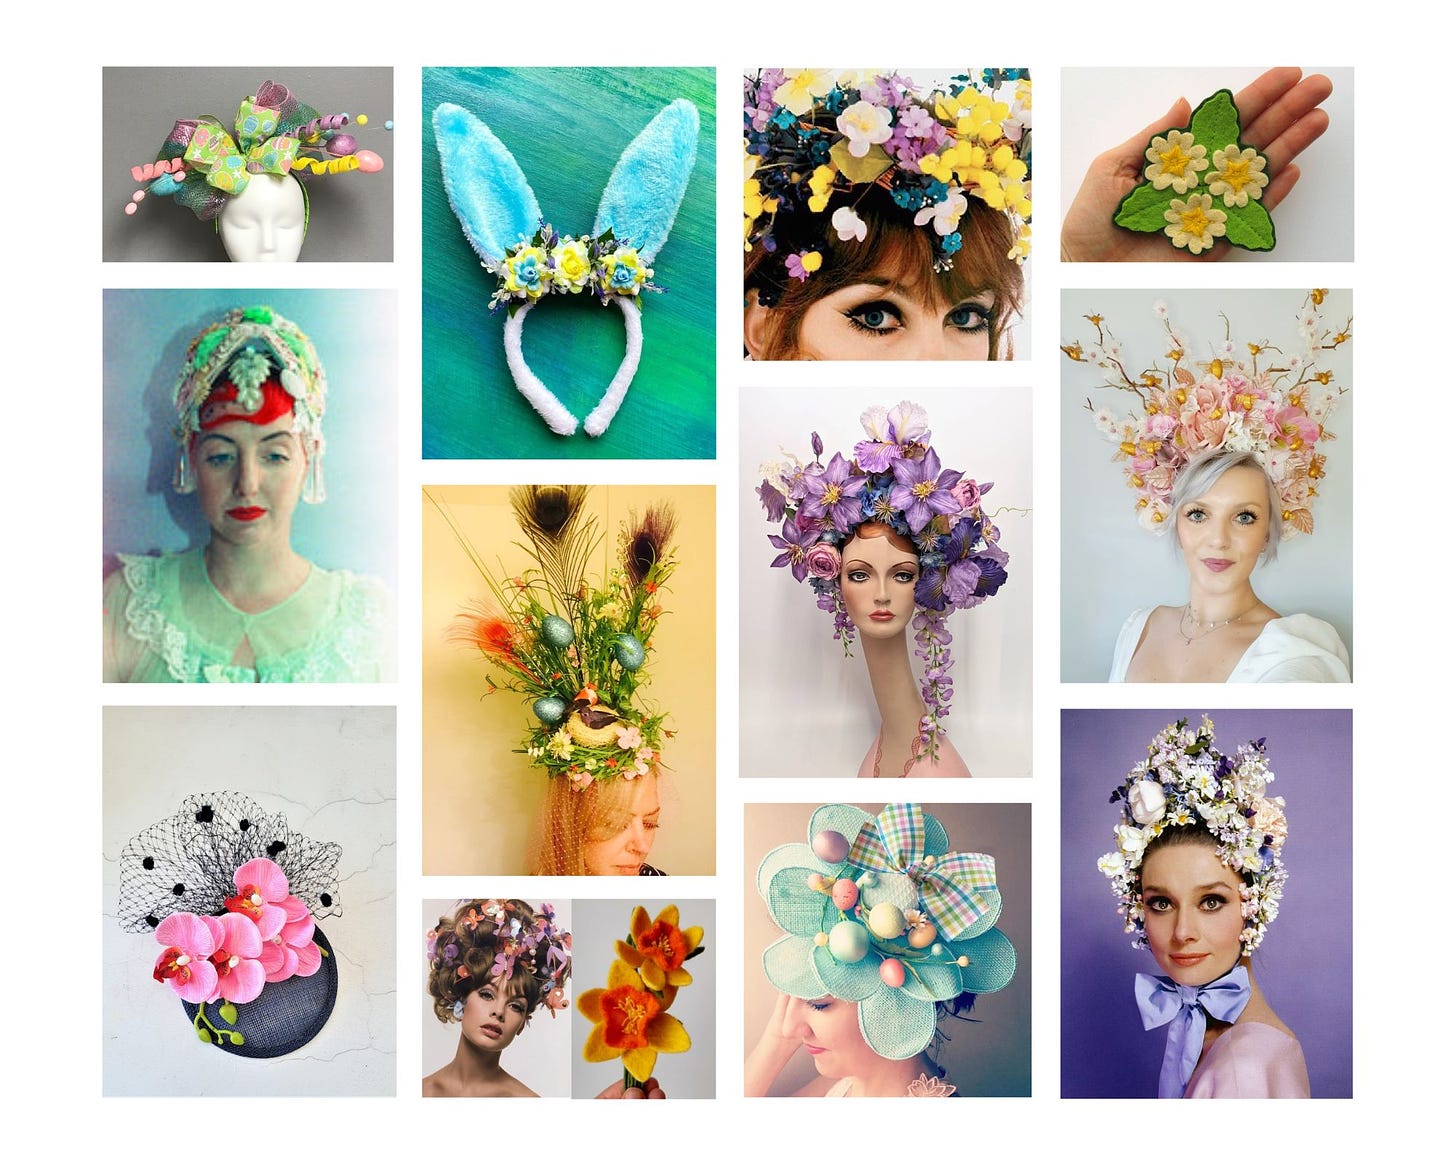 Photo Mosaic of Easter Bonnets and Floral Headpieces